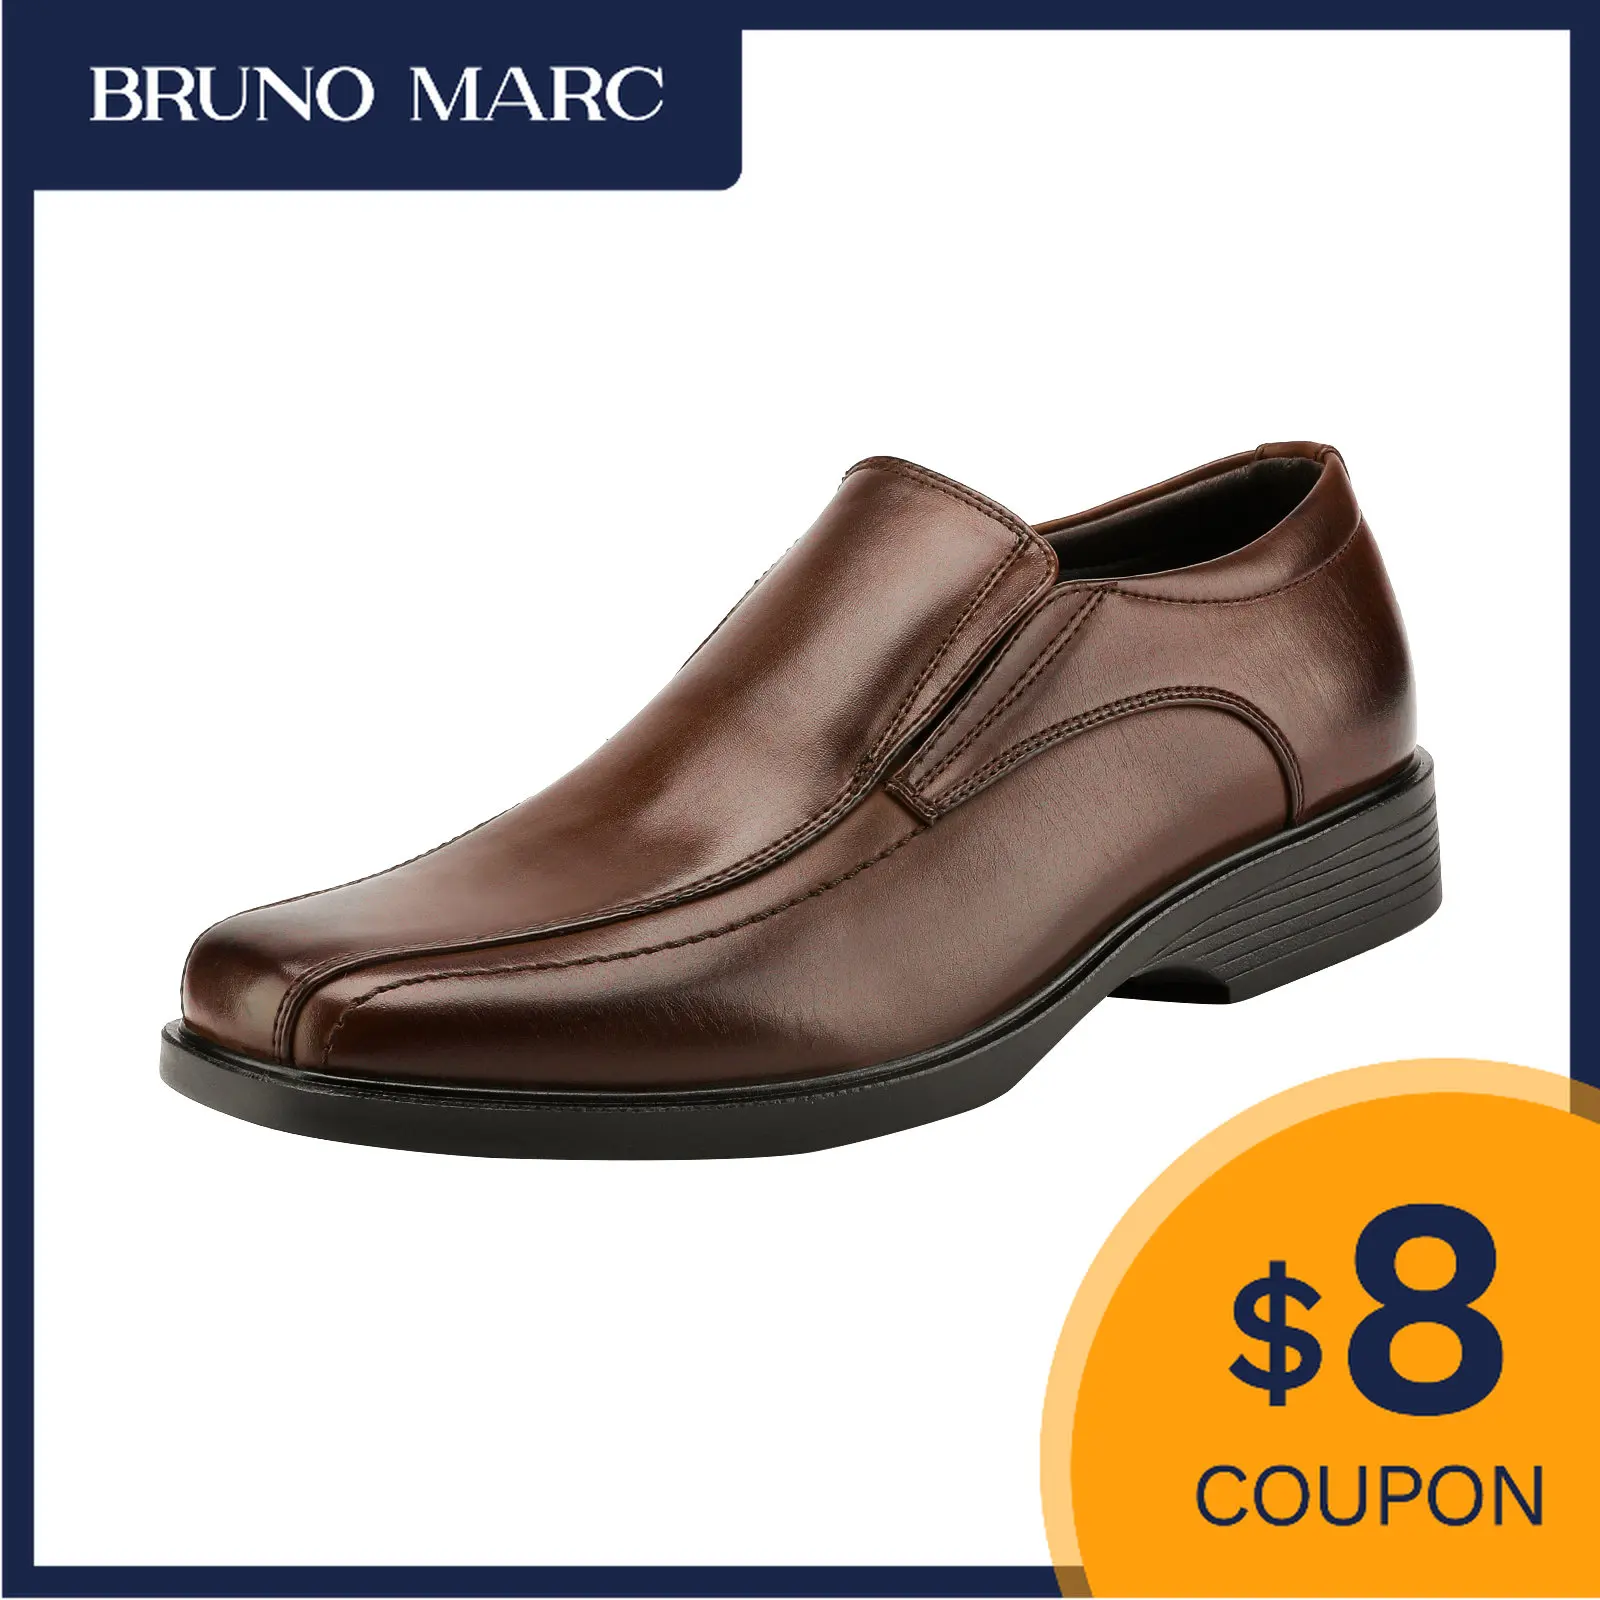 

Bruno Marc Mens Leather Slip on Dress Shoes Wedding Casual Business Classic Loafers Modern Formal Luxury Shoes for Man Brand